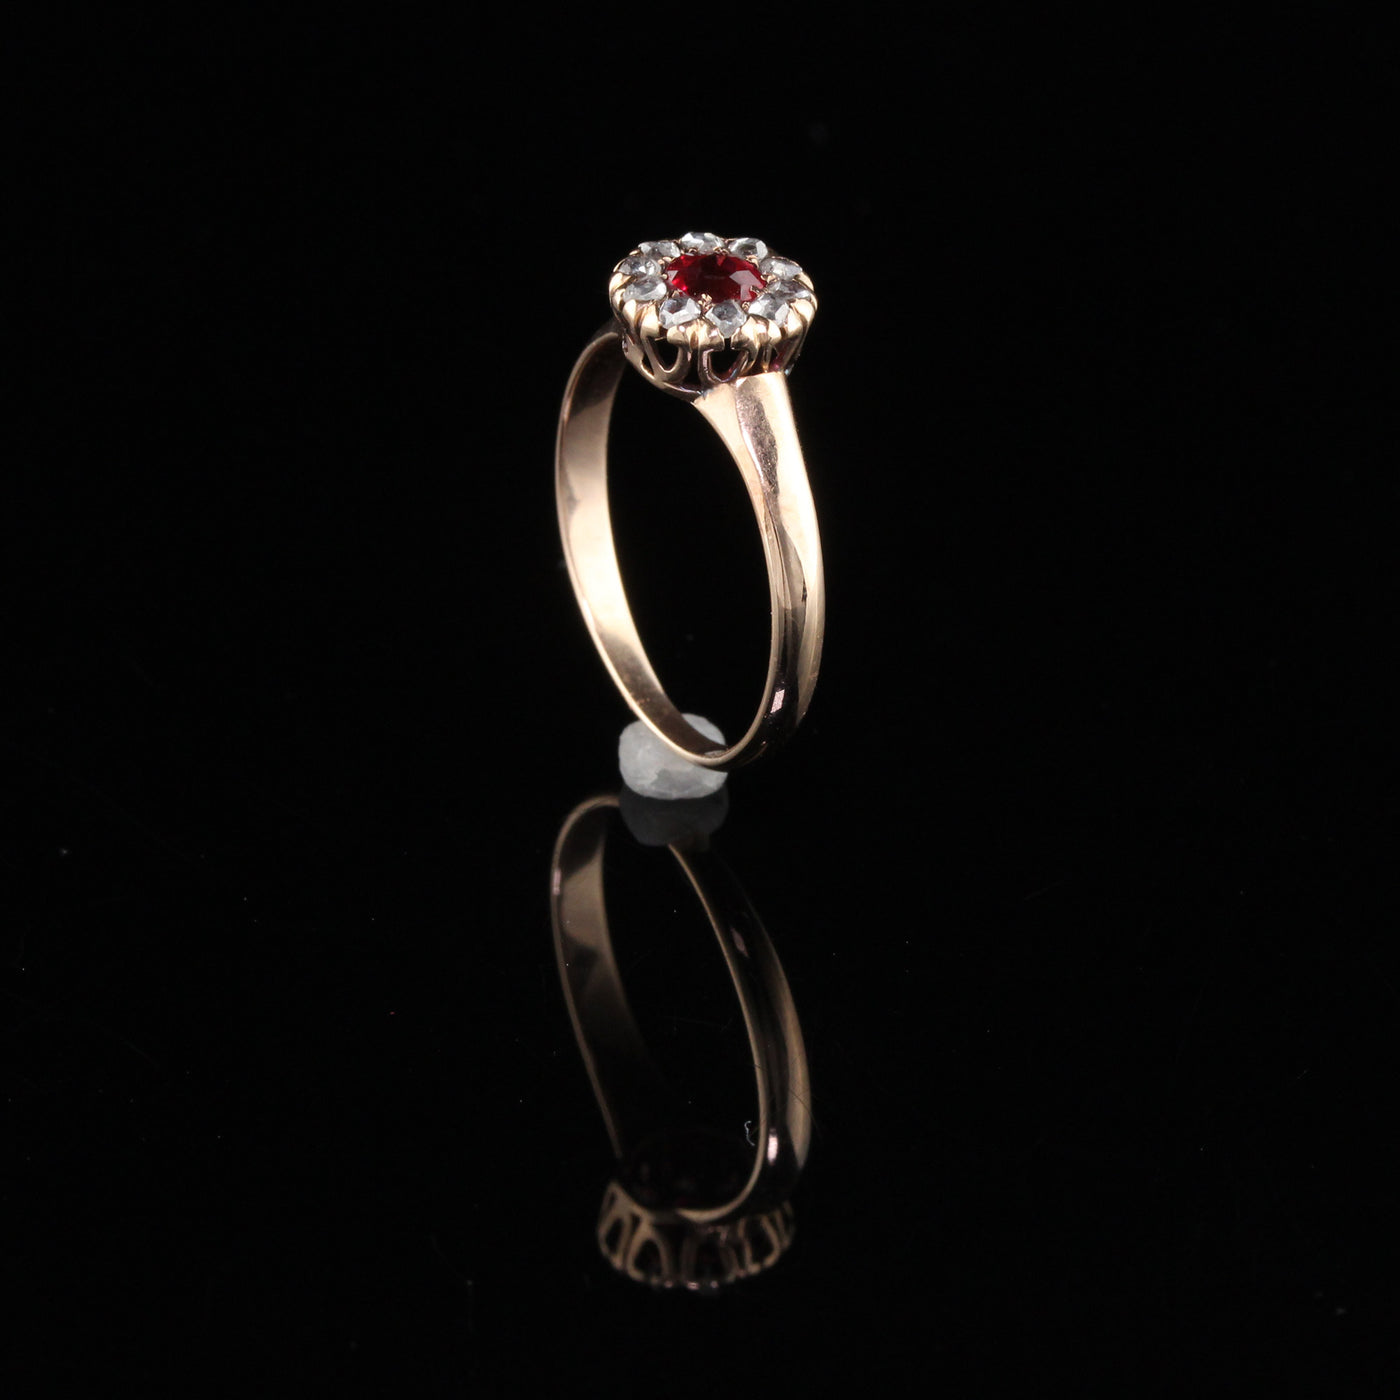 Victorian 10K Yellow Gold Rose Cut Diamond And Ruby Ring - Size 6 1/4